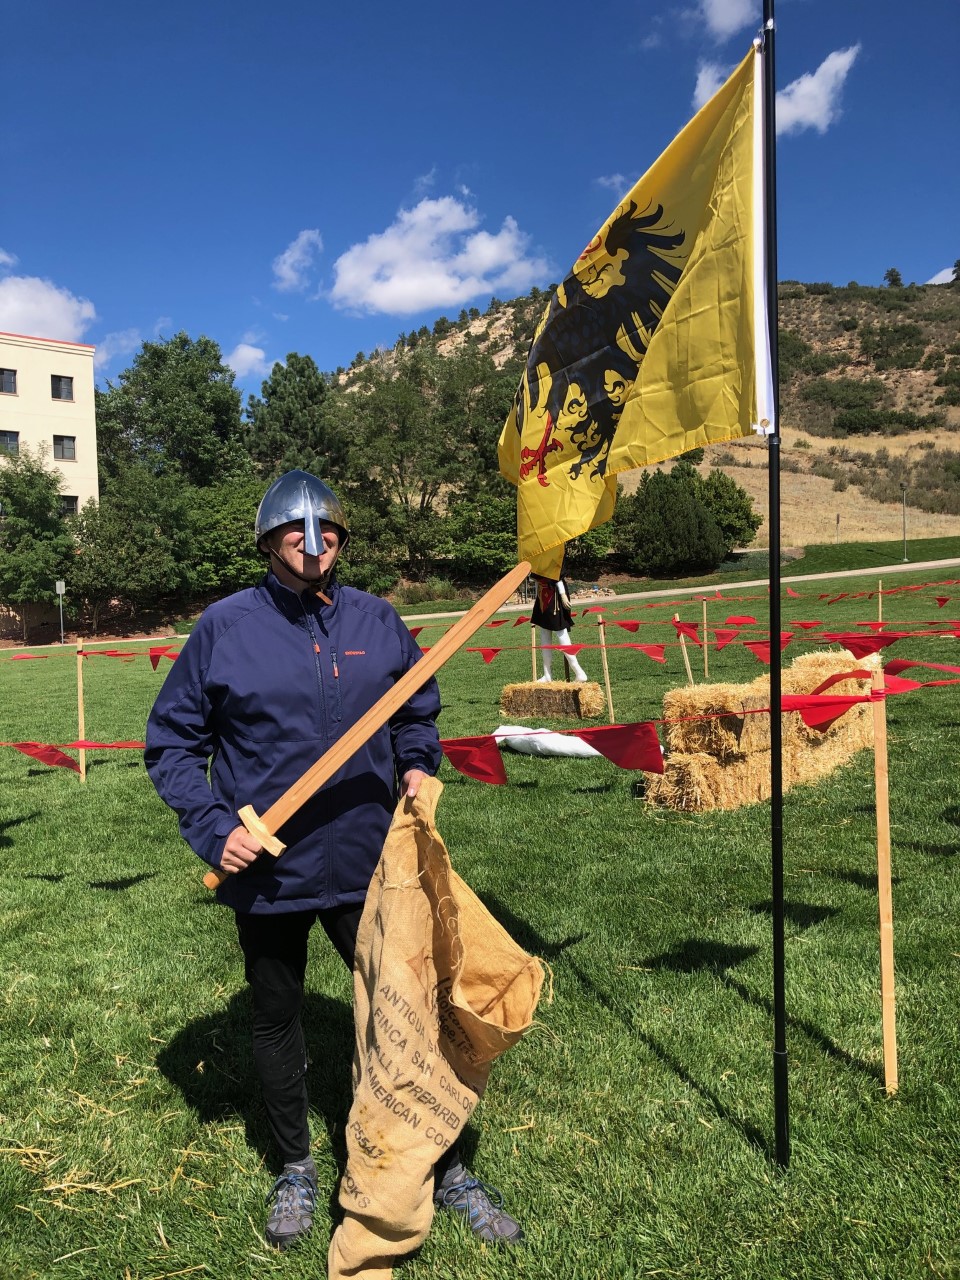 Person in medieval costume with flag